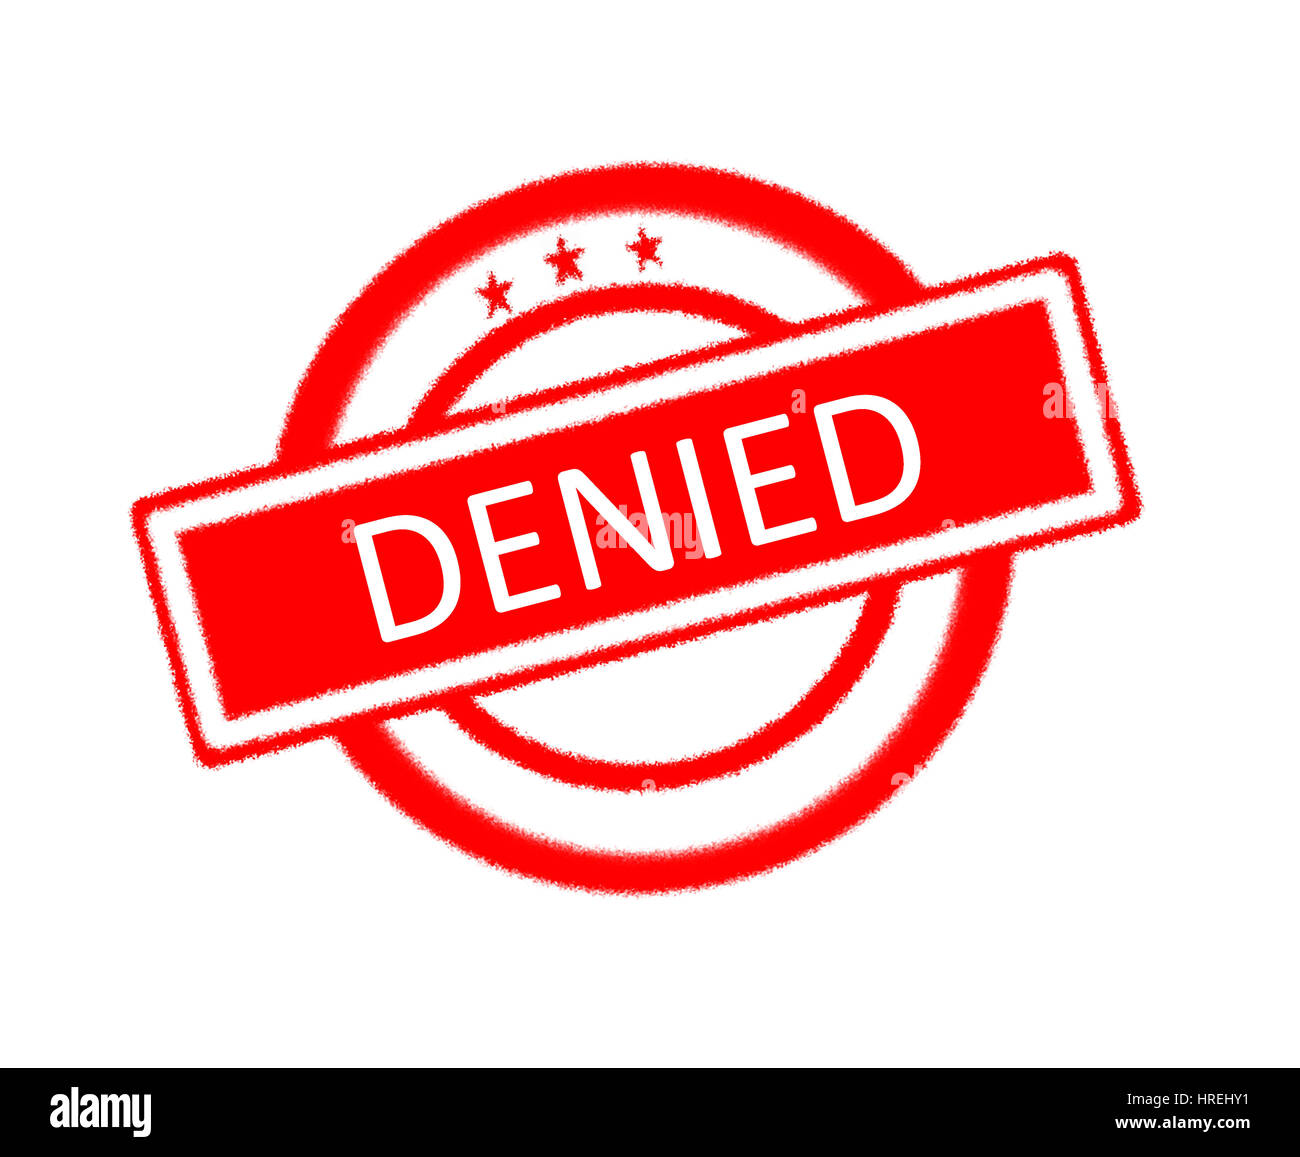 Illustration of denied word on red rubber stamp Stock Photo